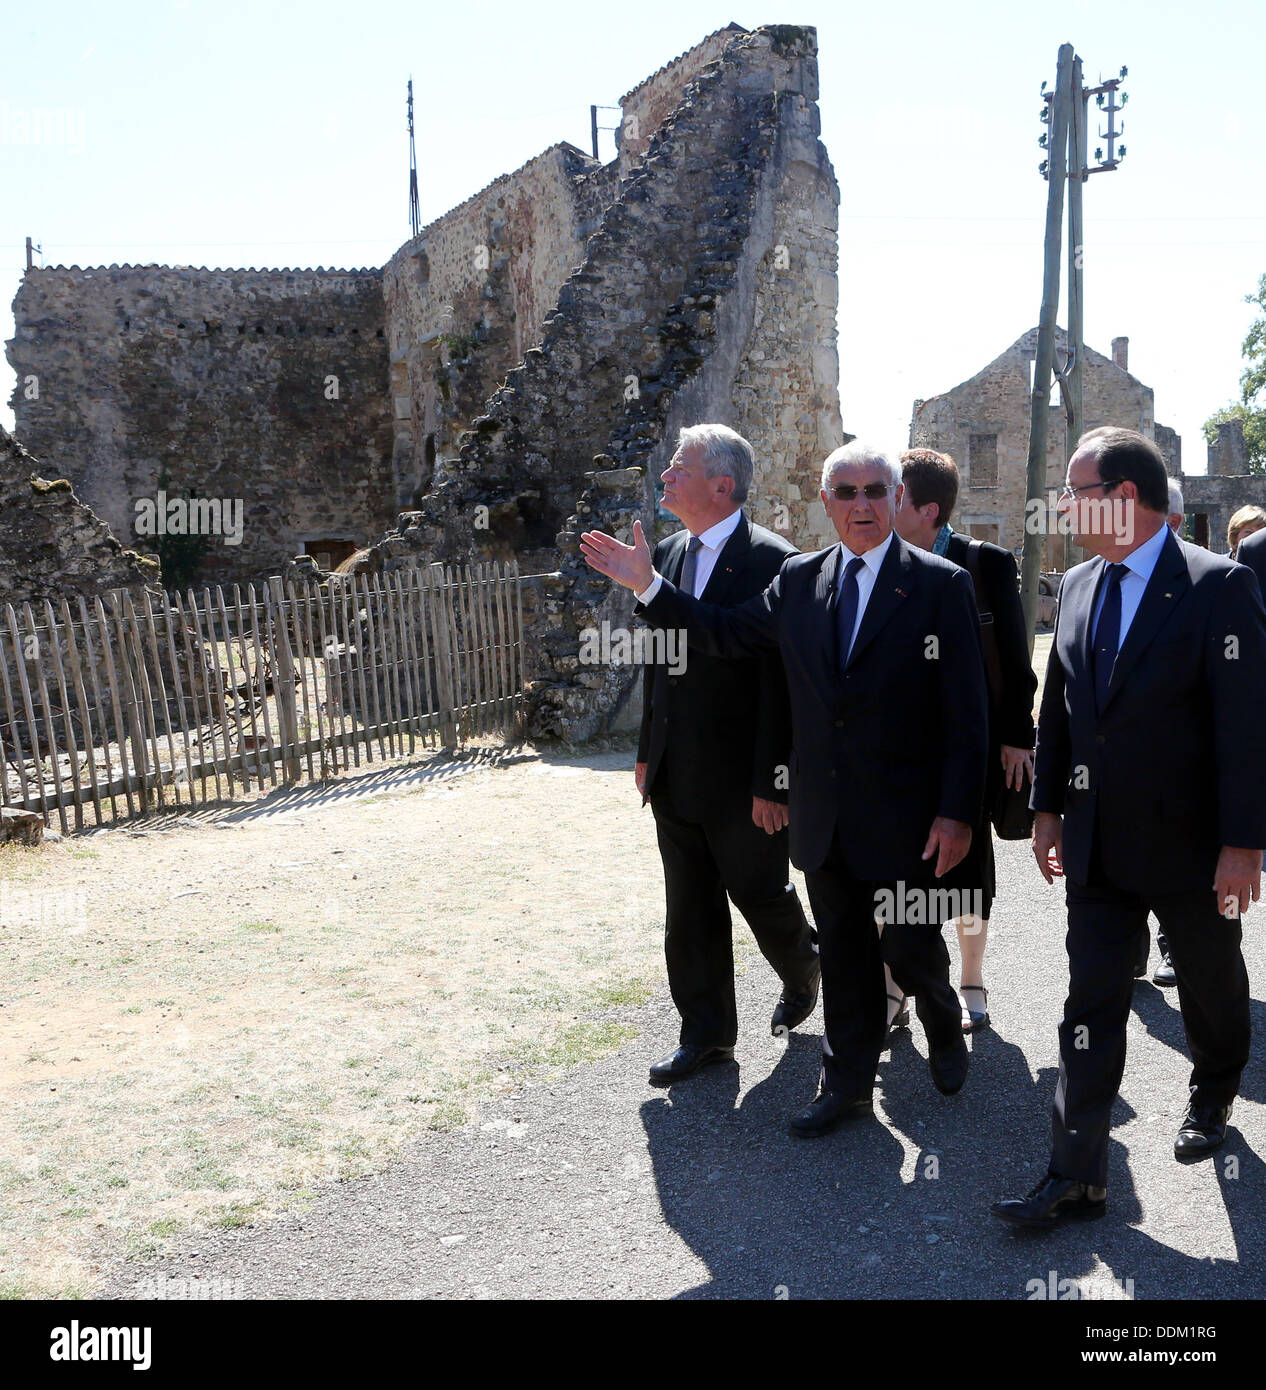 Oradour-sur-Glane, France. 04th Sep, 2013. German President Joachim Gauck (L), French President Francois Hollande and survivor of the massacre in Oradour-sur-Glane during World War II Robert Hebras (R) are pictured at the memorial site in Oradour-sur-Glane, France, 04 September 2013. A unit of SS officers murdered 642 citizens of the town in June 1944. The German President is on a three-day visit to France. Photo: WOLFGANG KUMM/dpa/Alamy Live News Stock Photo